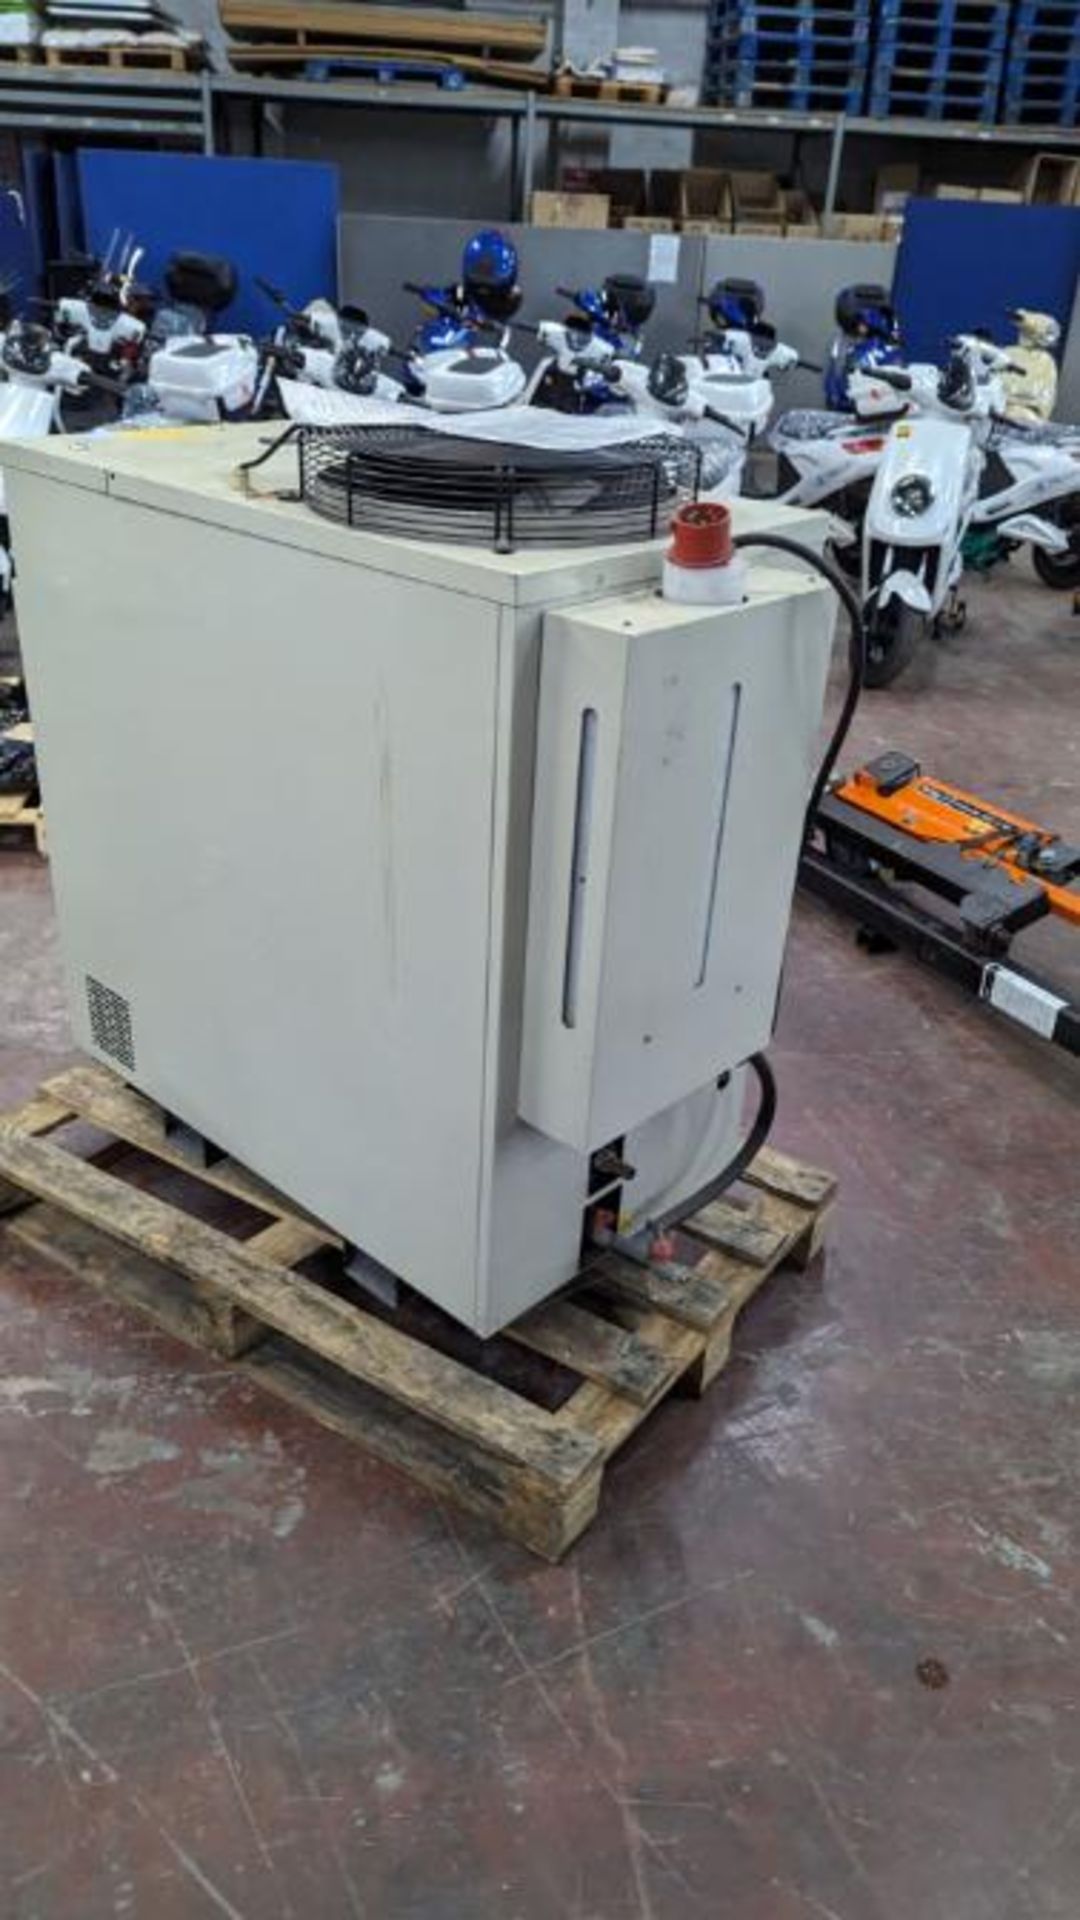 ICS type chiller TAE020 - Direct from commercial facility - Image 3 of 6